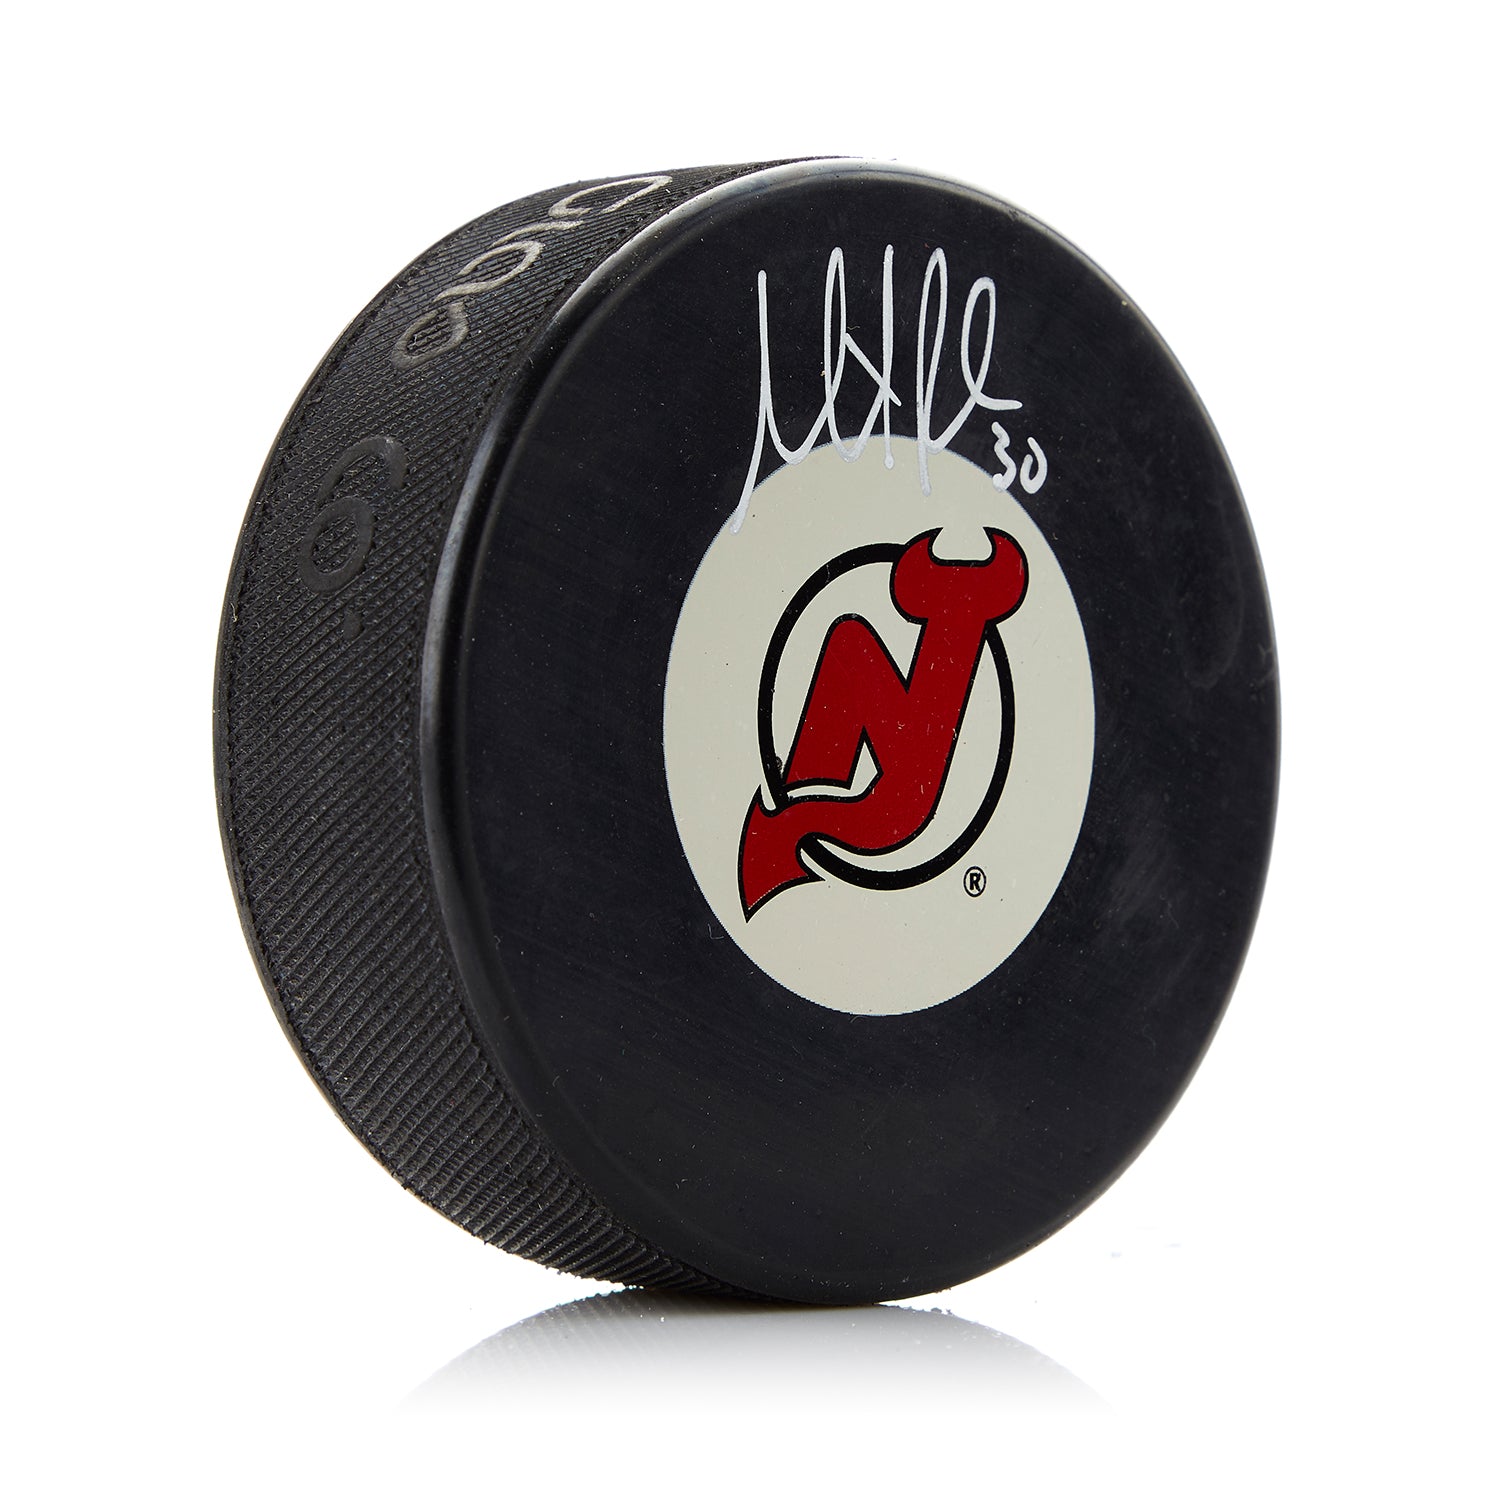 Martin Brodeur New Jersey Devils Autographed Hockey Puck